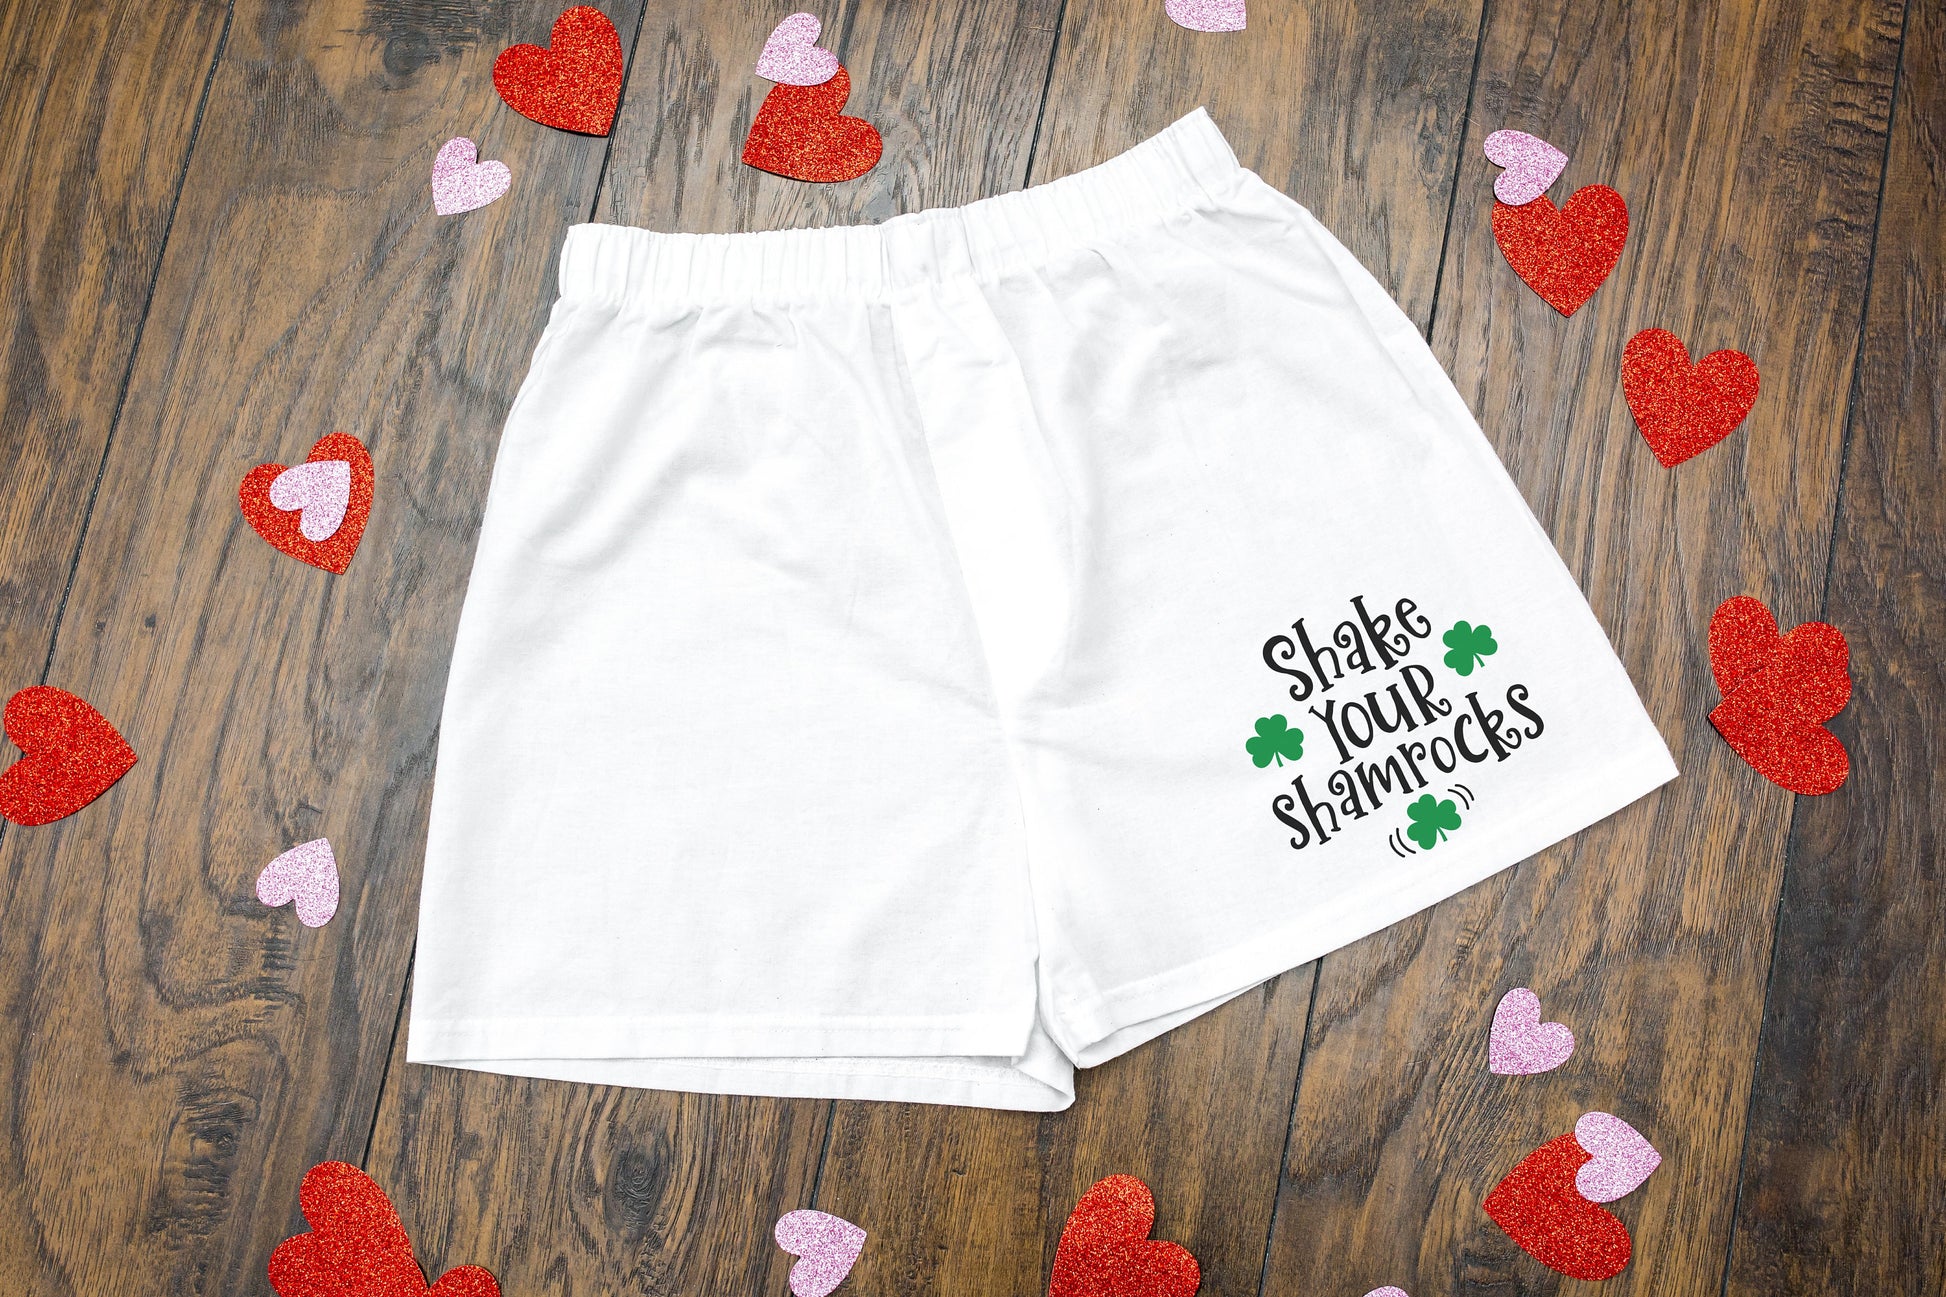 Shake Your Shamrocks Men&#39;s St Patrick&#39;s Day Cotton Boxer Shorts - False Fly - Gift for Him - Mens Boxers - Funny Boxers - Naughty Boxers